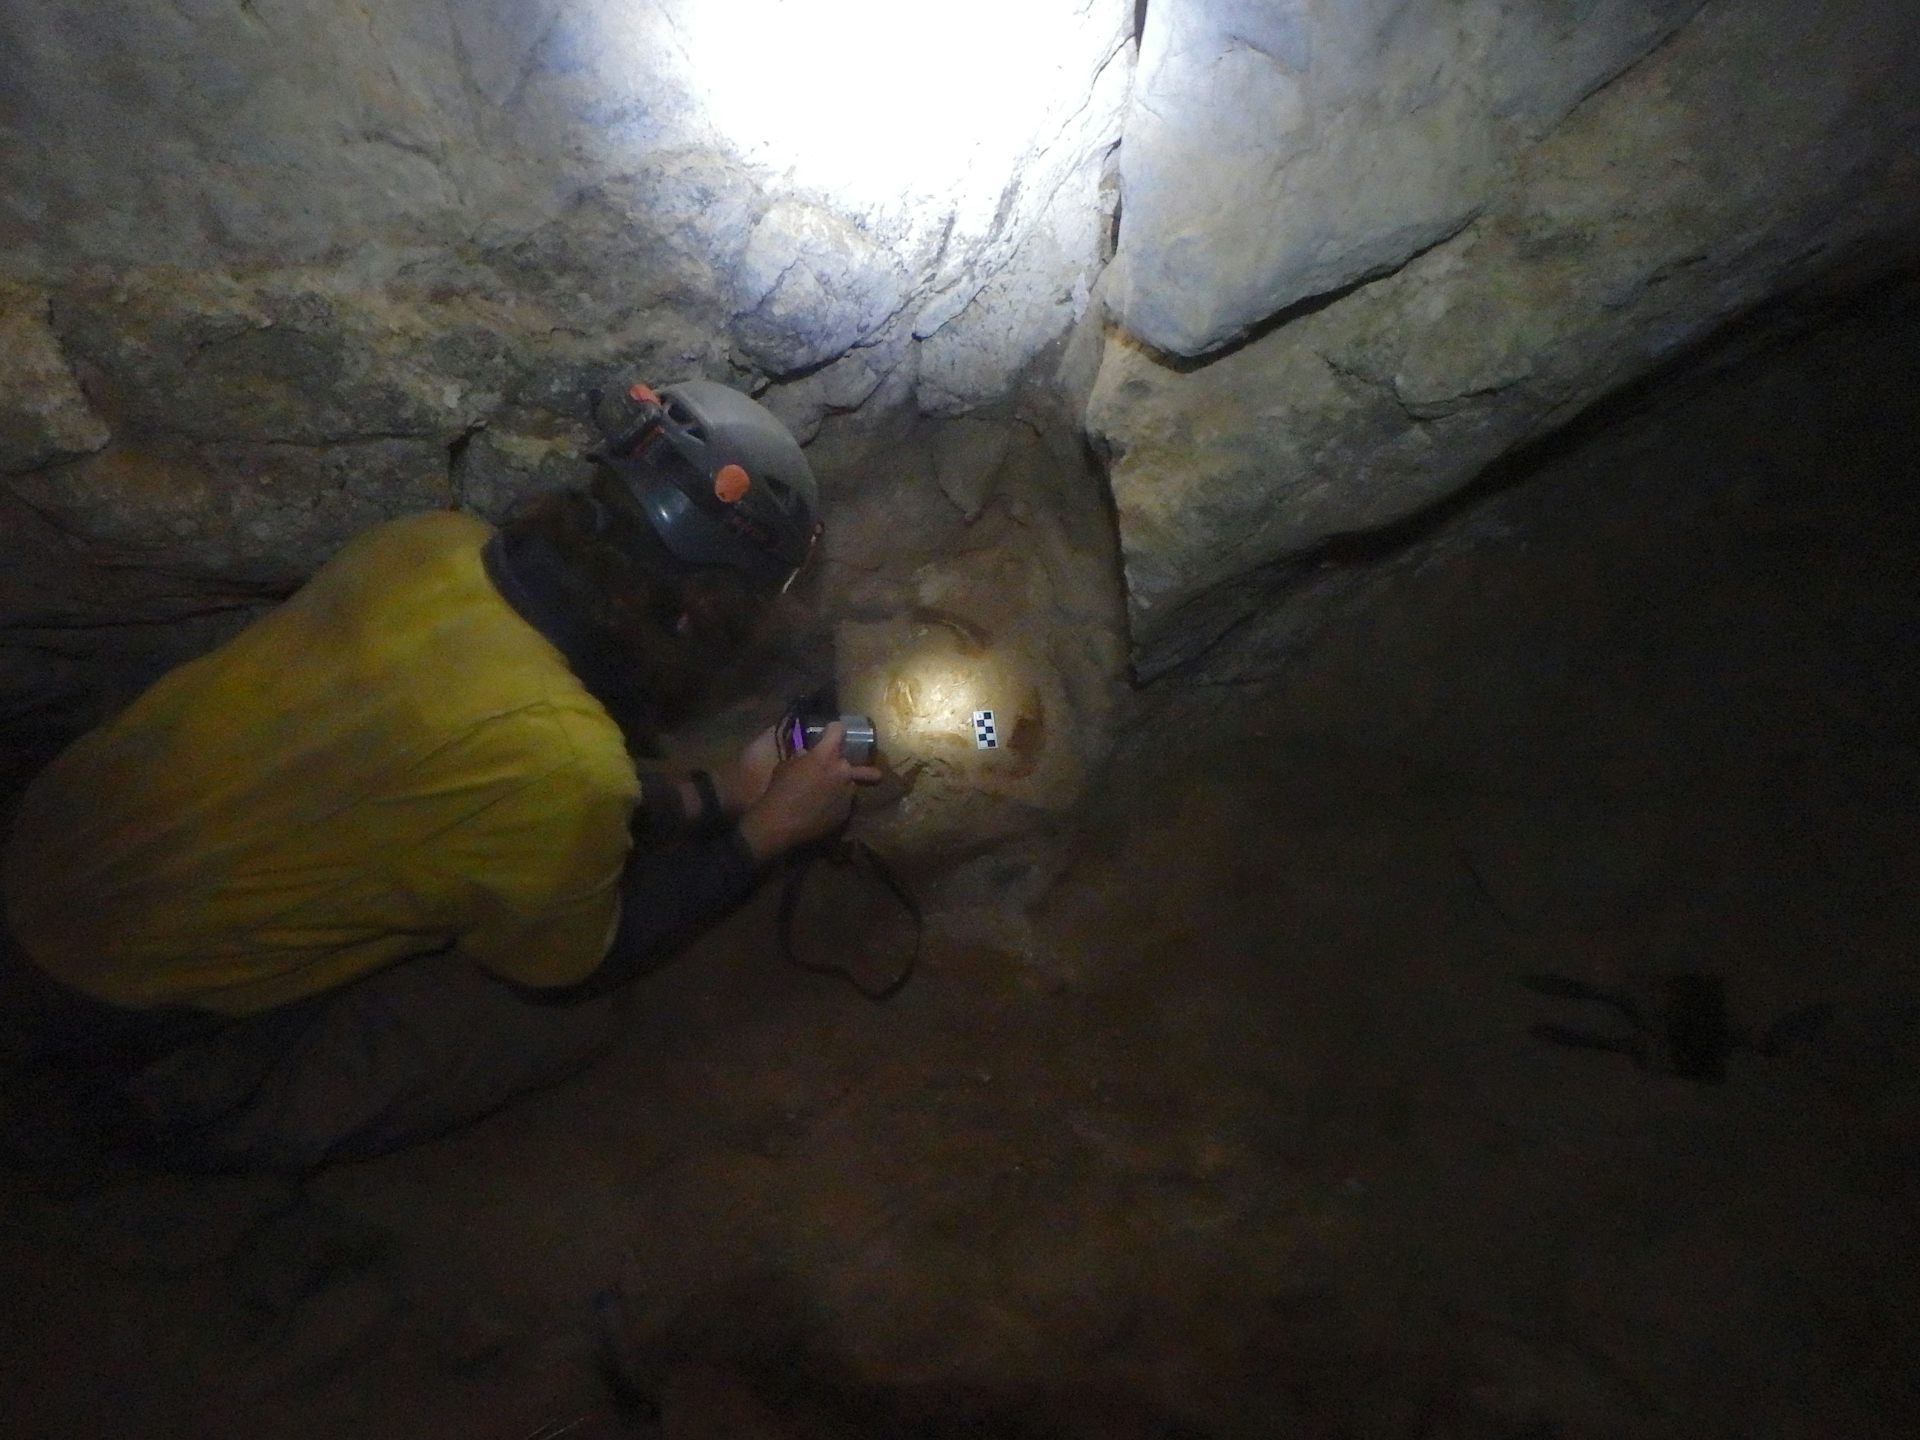 Dark photograph of a person in yellow shirt crouching next to rocks in a cave with a headlight on